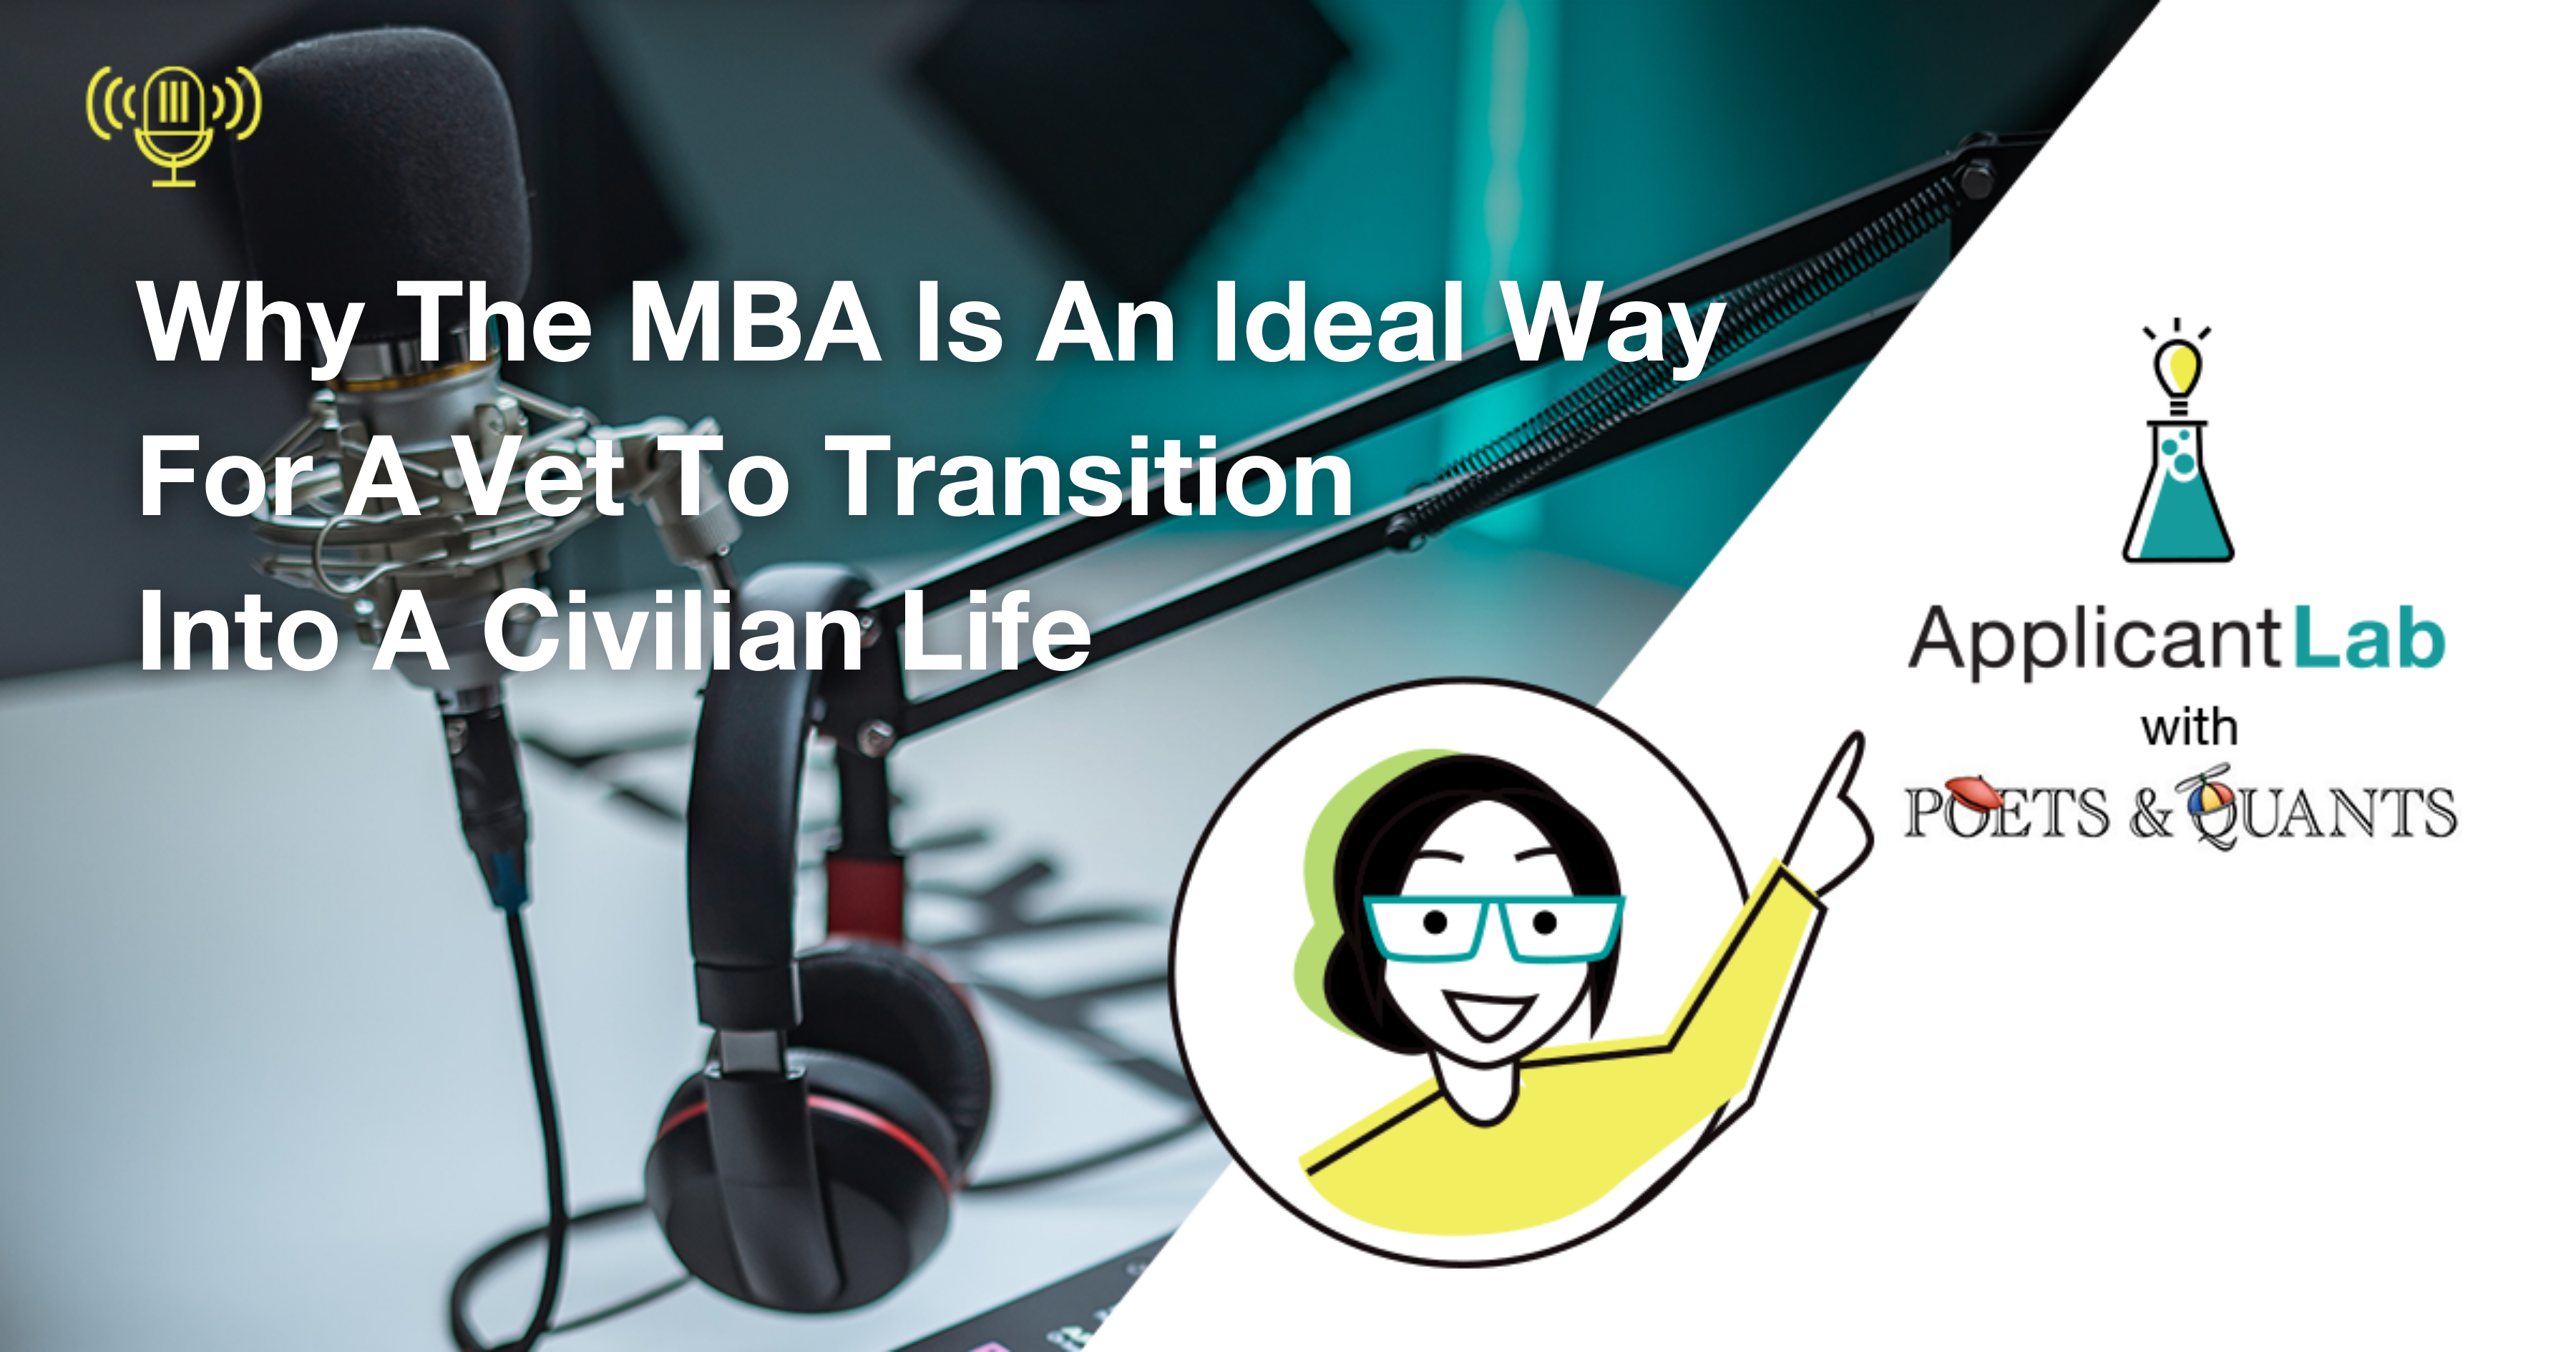 Why The MBA Is An Ideal Way For A Vet To Transition Into A Civilian Life